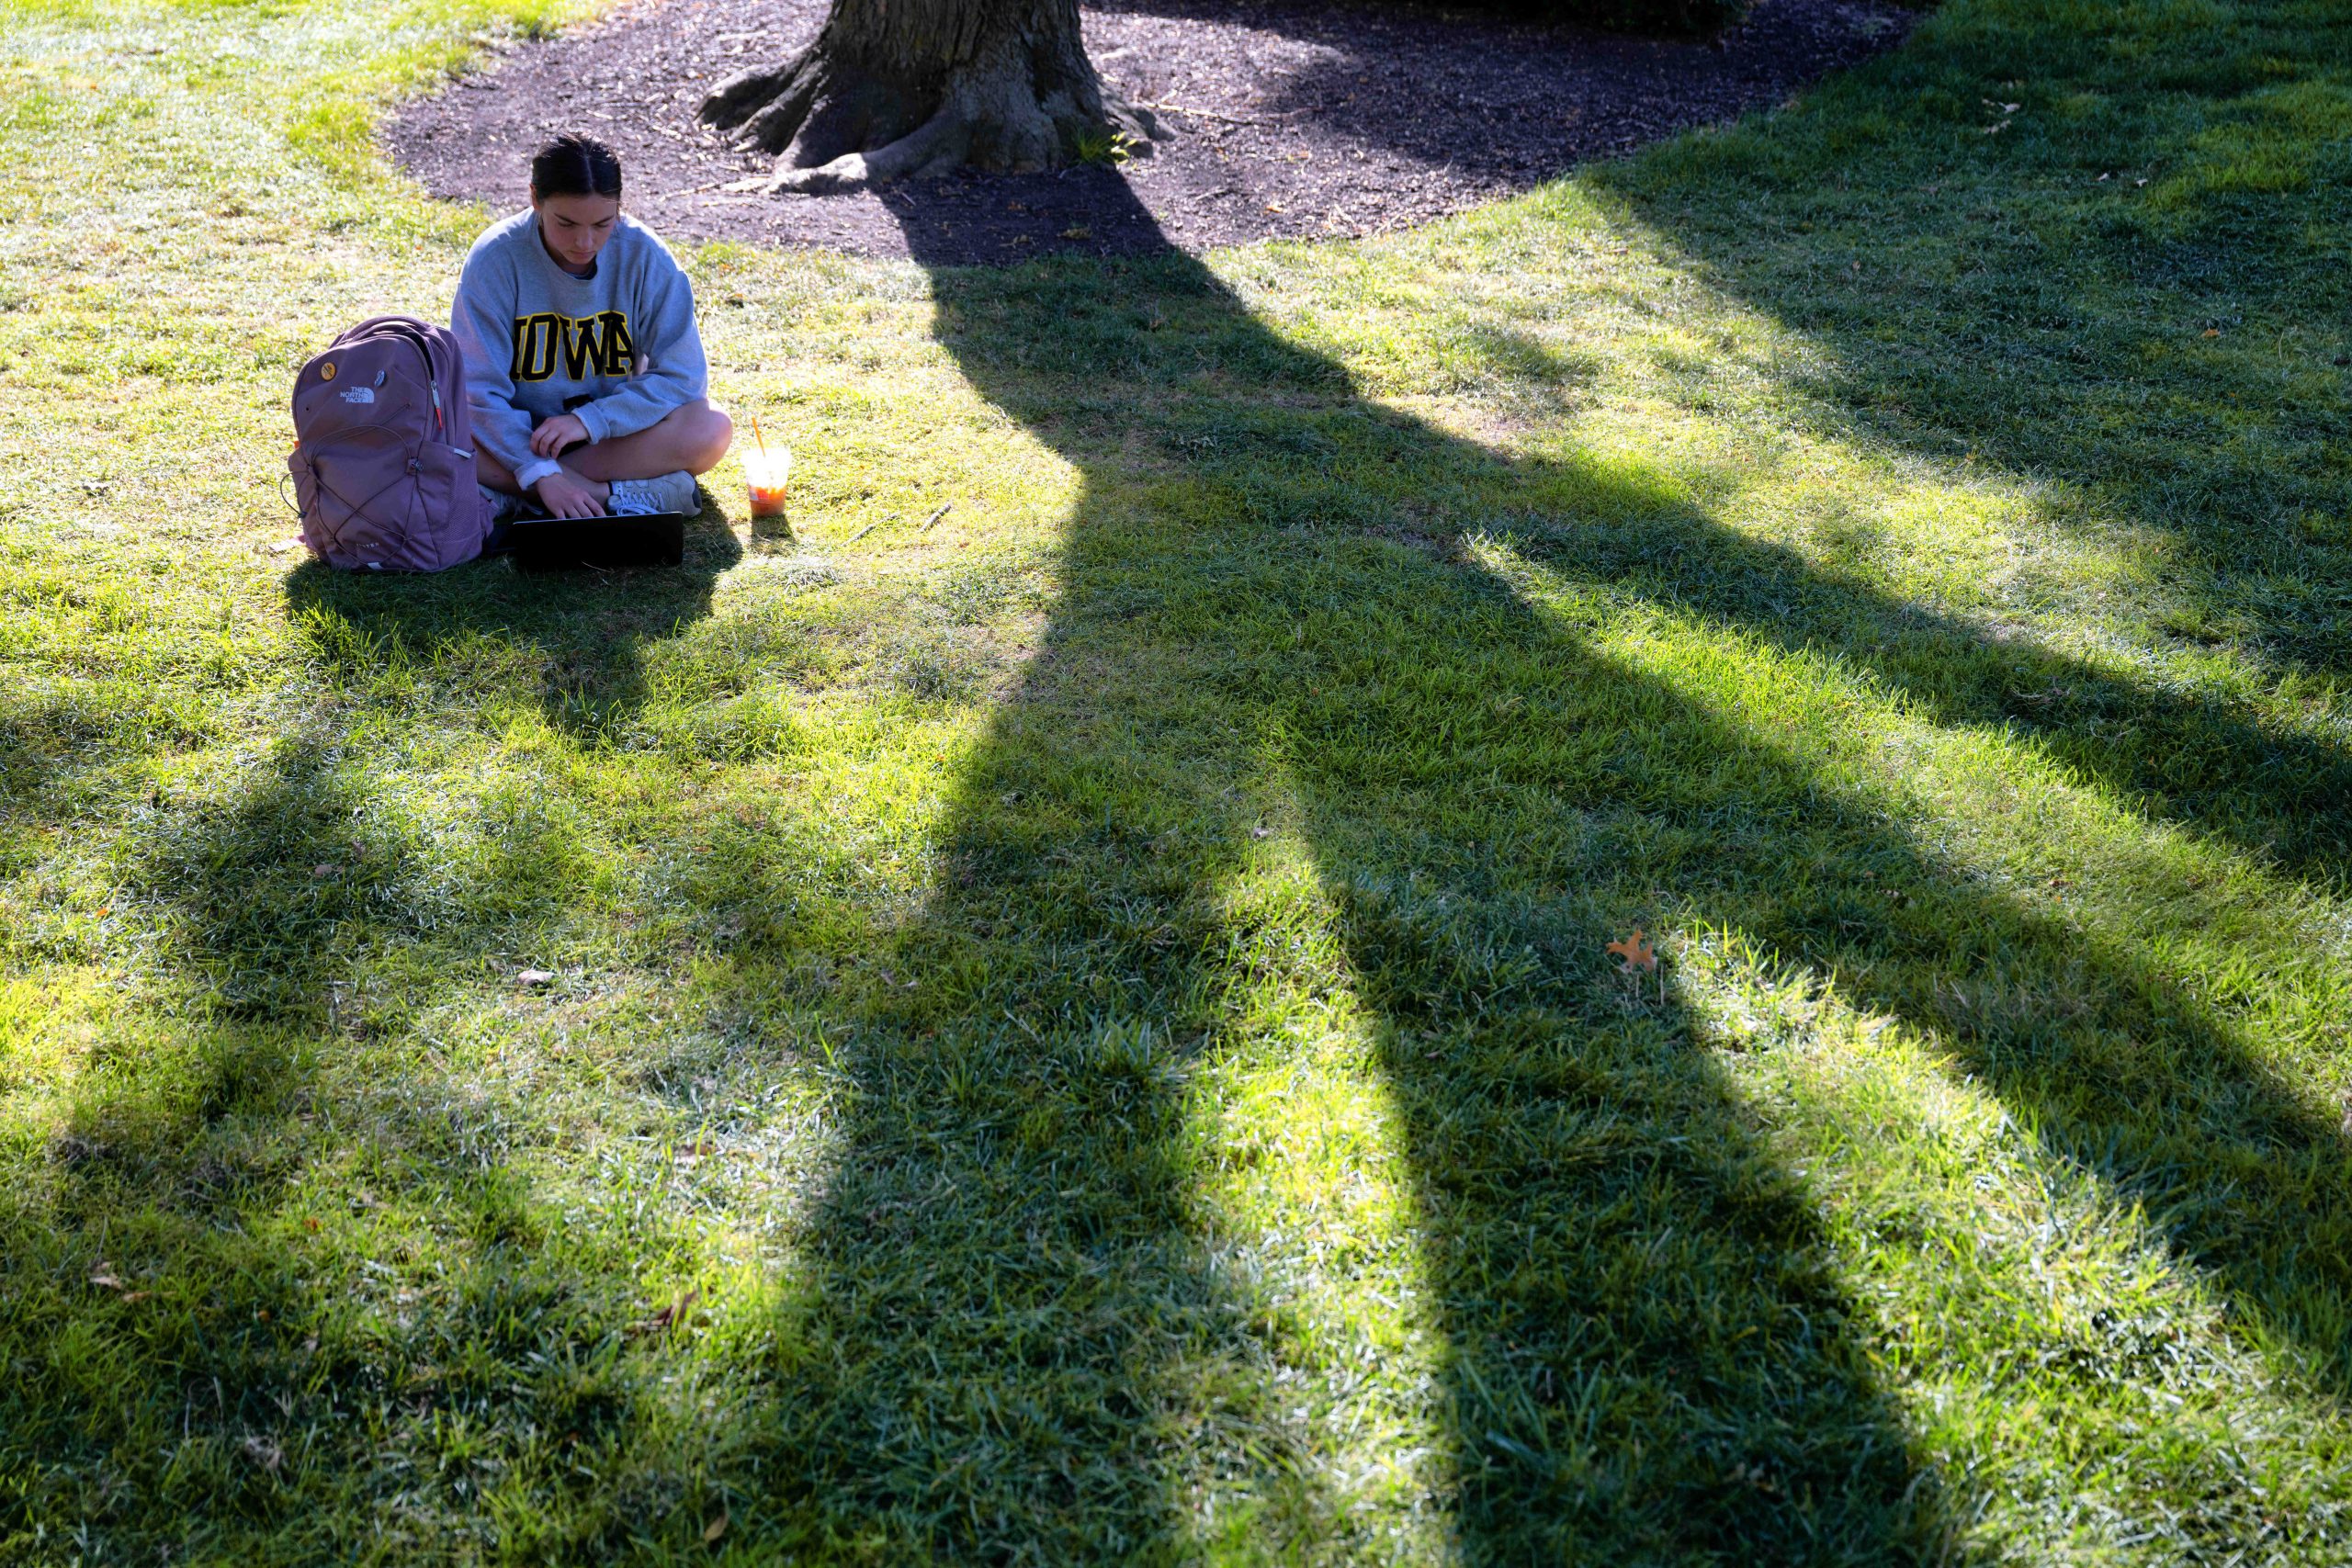 A student is sitting in the grass near a large tree, working on their laptop.